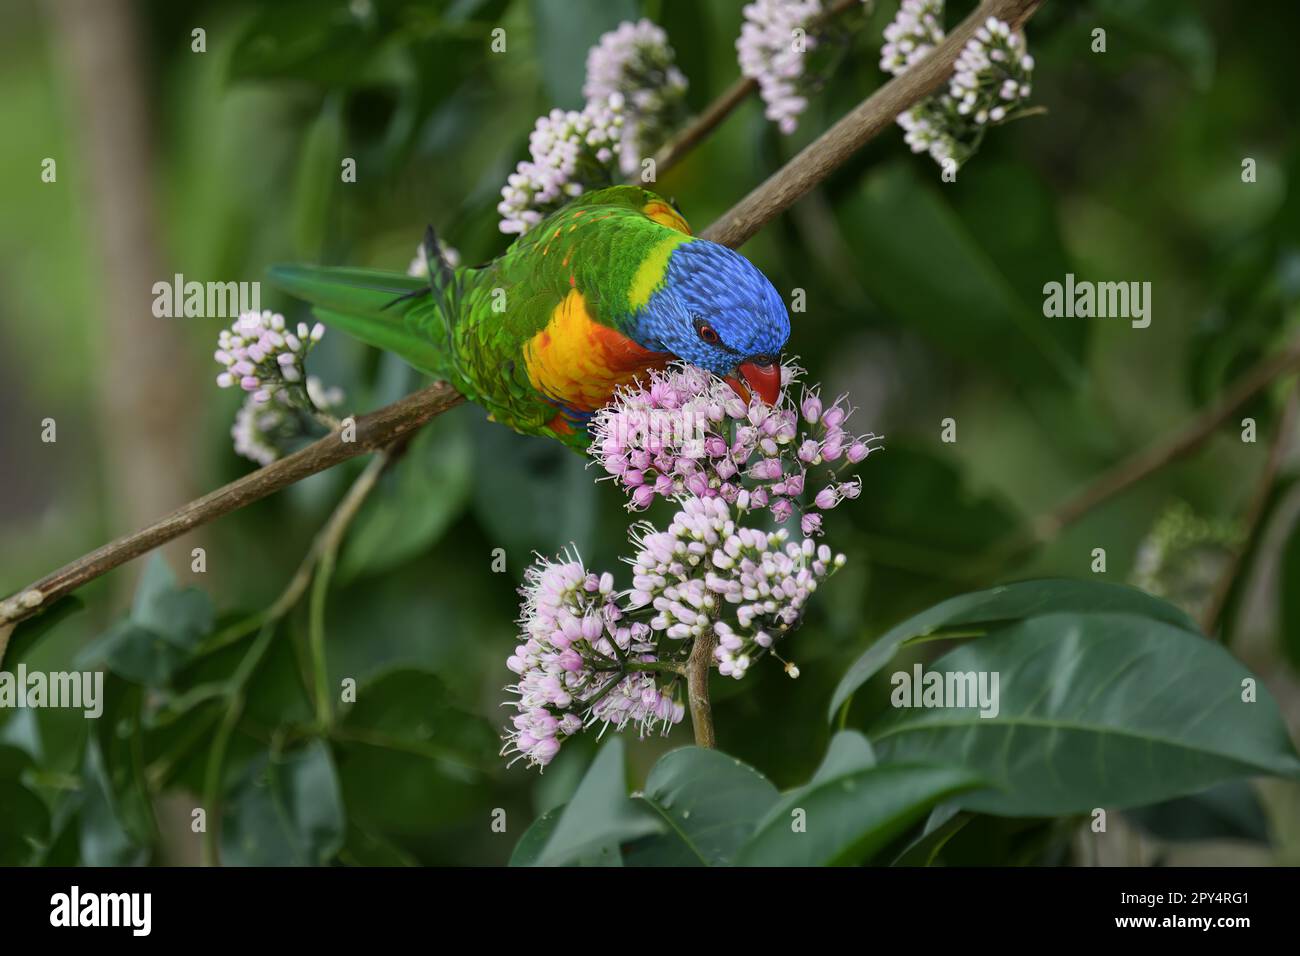 An Australian adult Rainbow Lorikeet -Trichoglossus moluccanus- bird perched, stretched out on a branch, feeding on nectar, in colourful lush light Stock Photo